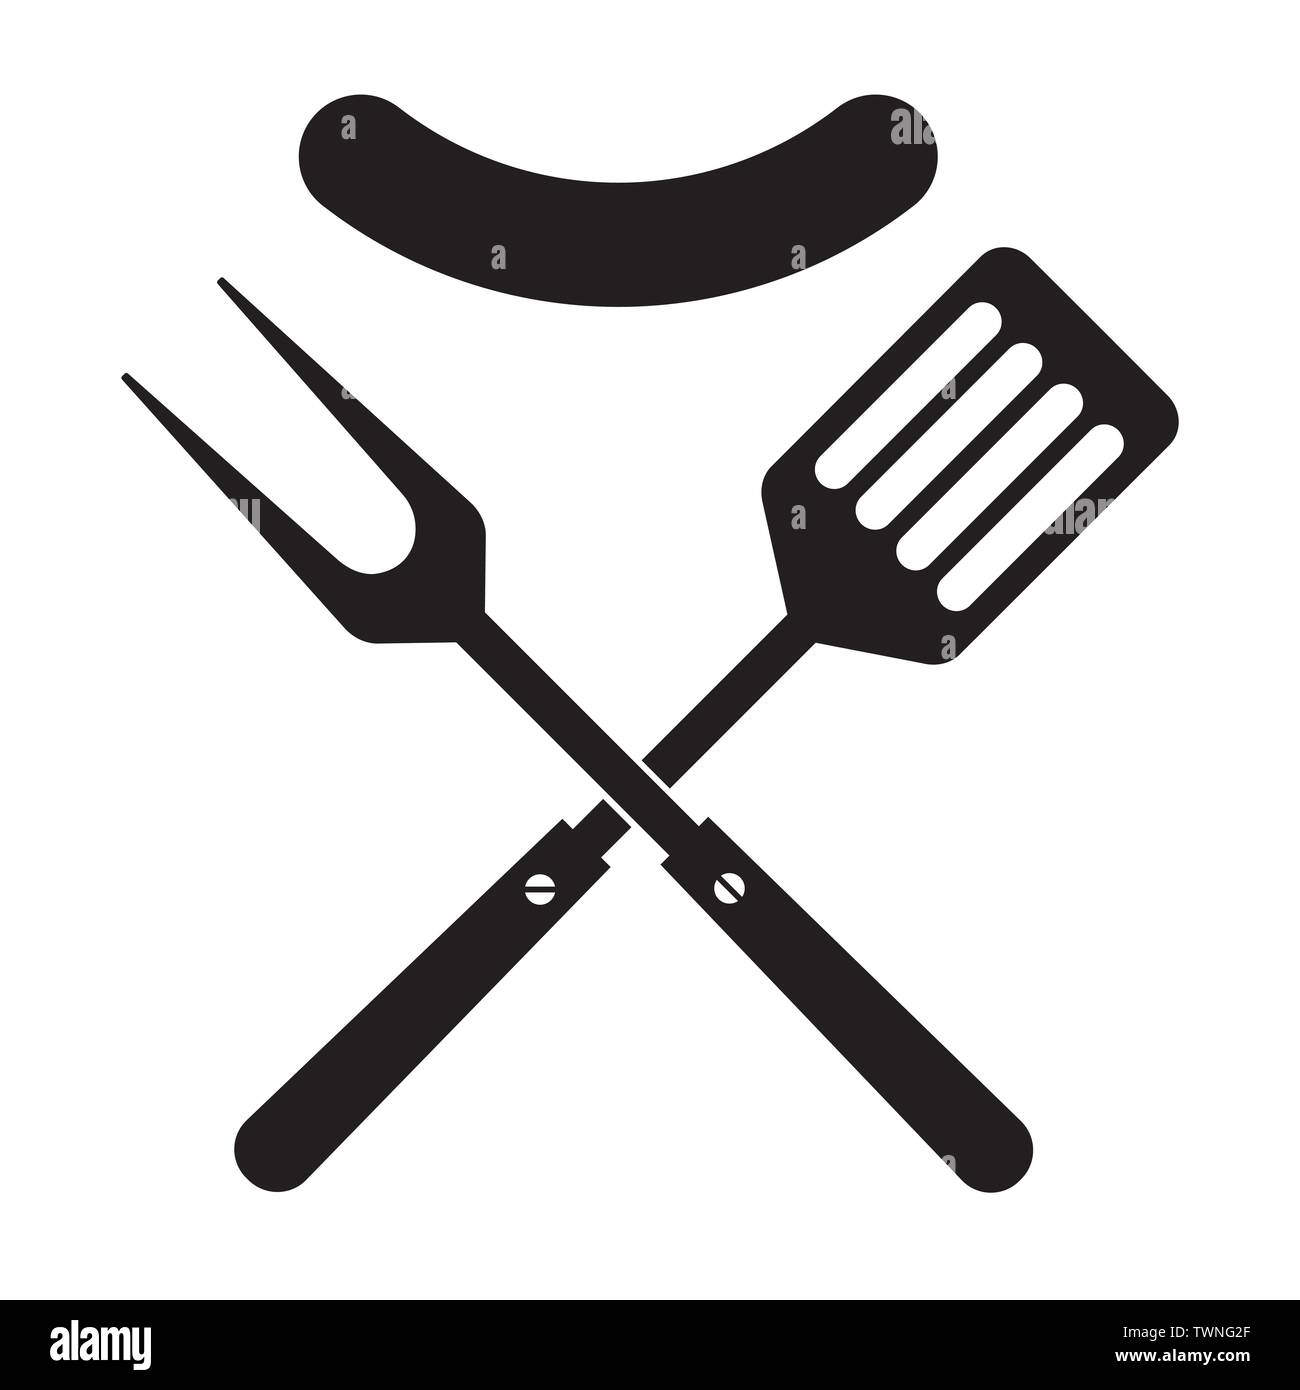 BBQ or grill tools icon. Crossed barbecue fork and spatula with sausage. Symbol template logo. Isolated vector illustration on white background. Stock Vector